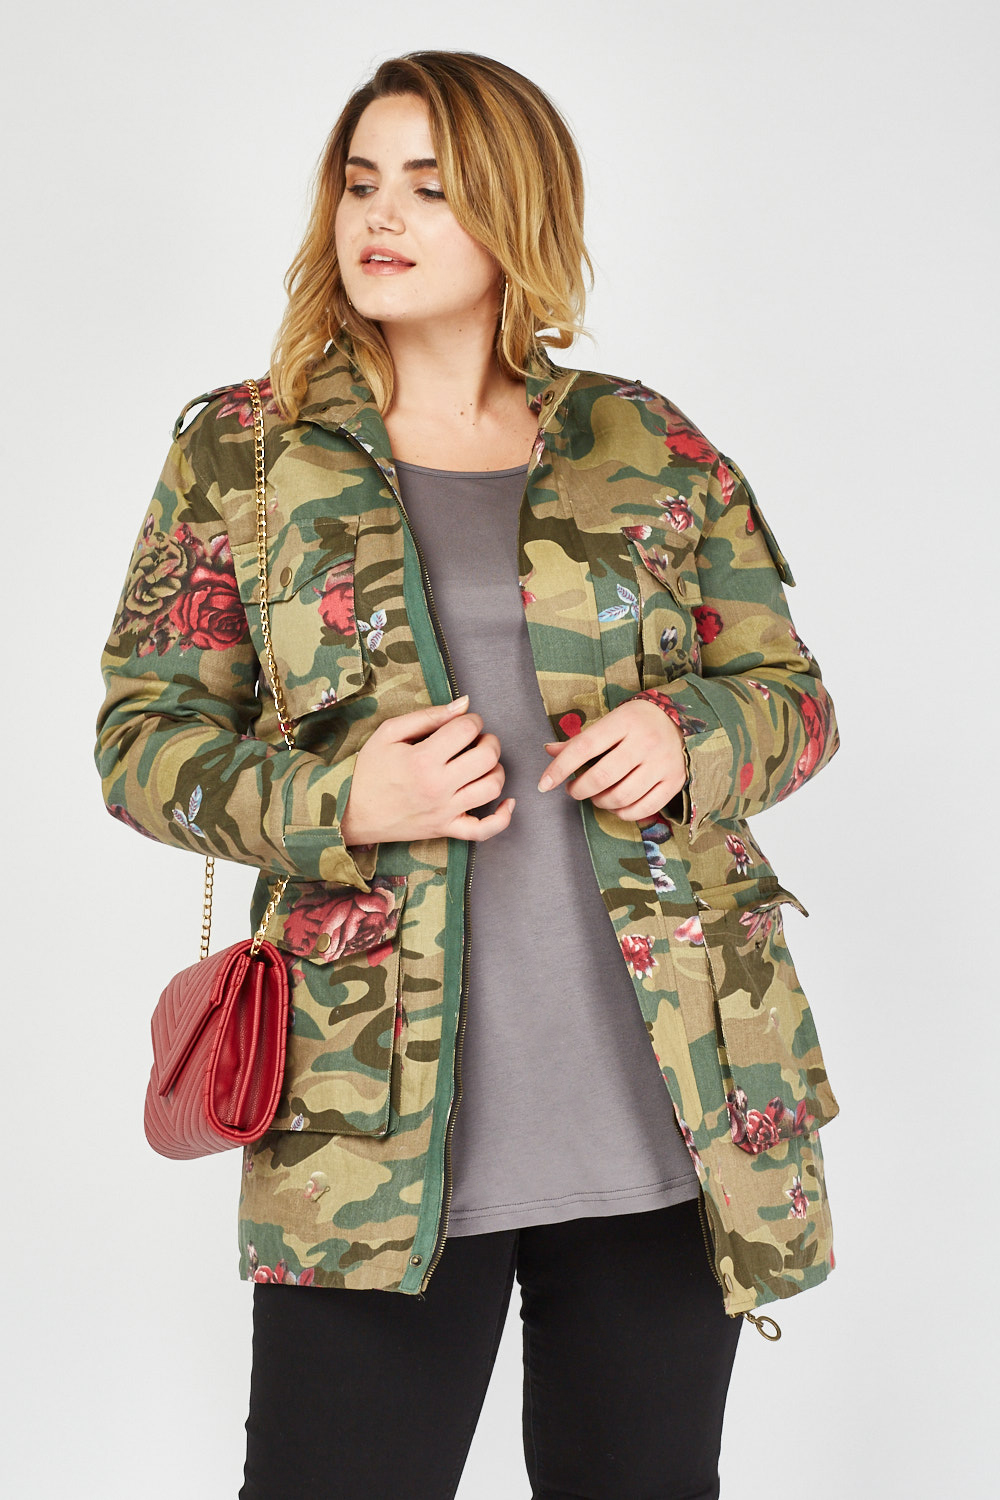 Floral Camouflage Printed Military Jacket - Just $7